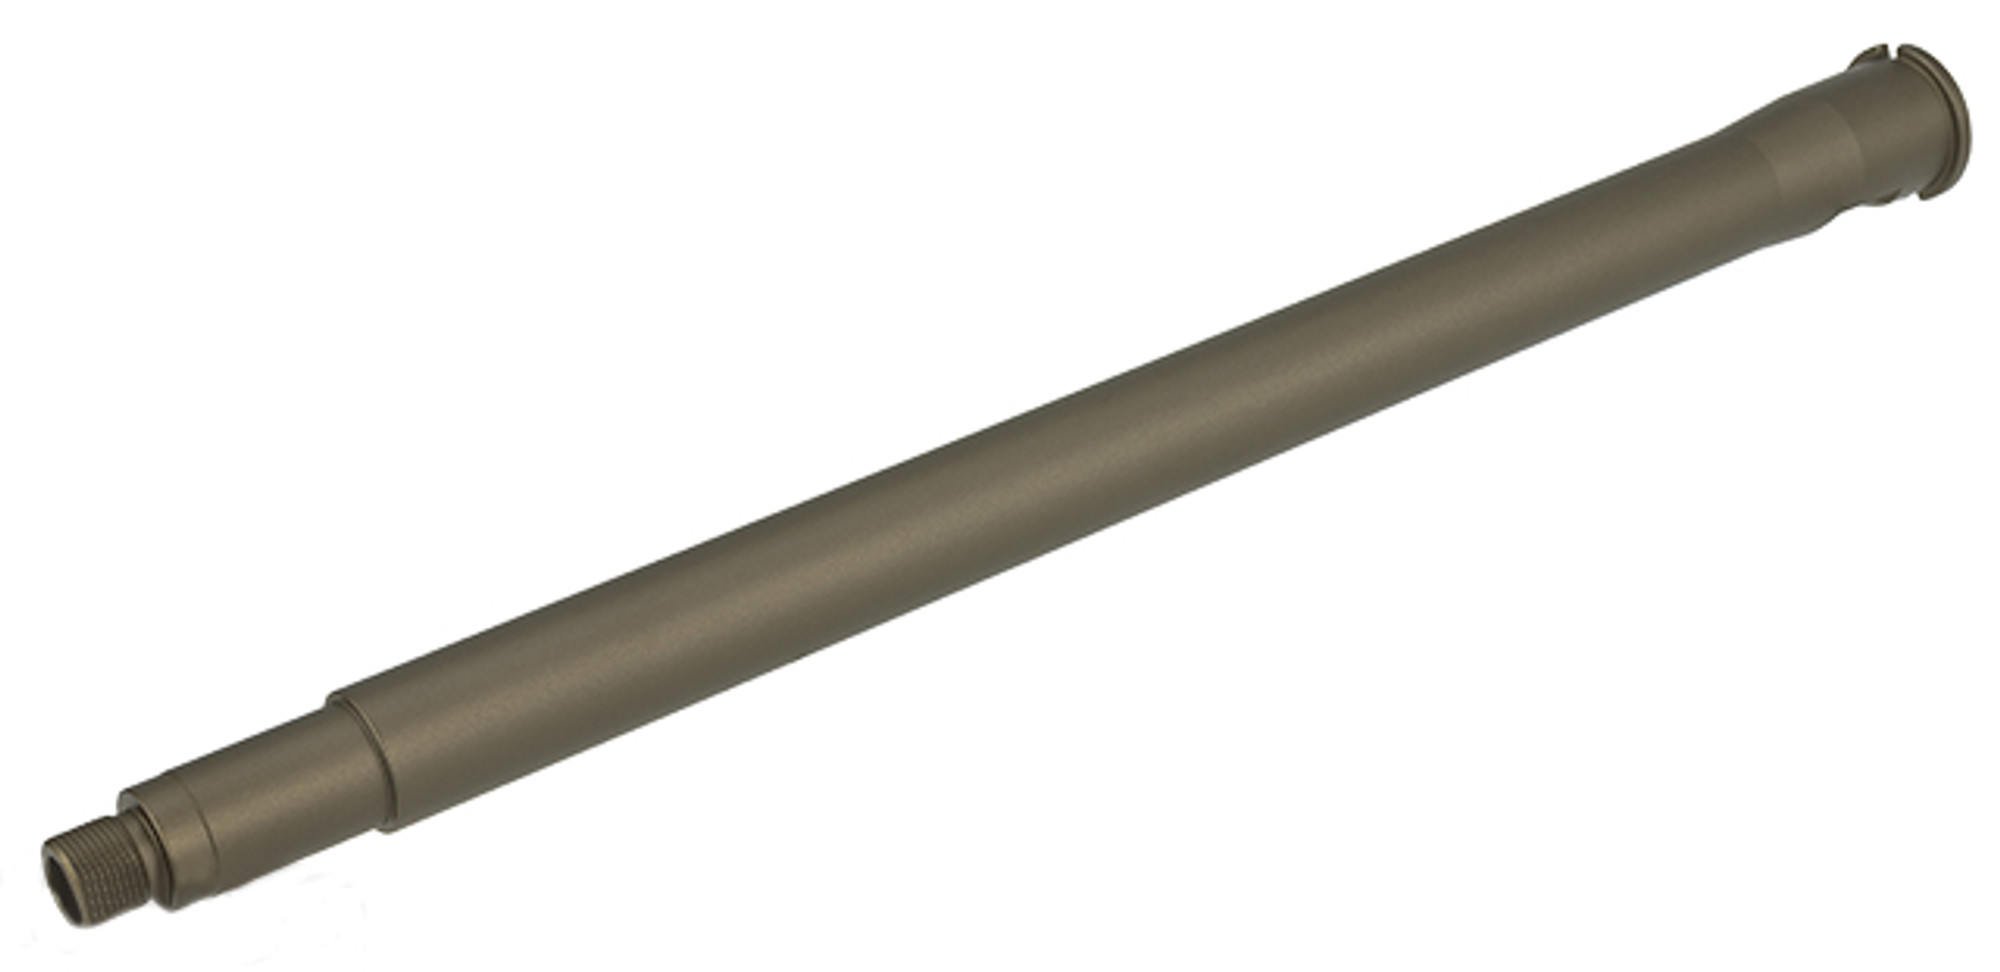 G&P 14.3" Outer Barrel for G&P/Western Arms Gas Blowback Rifles - Sand